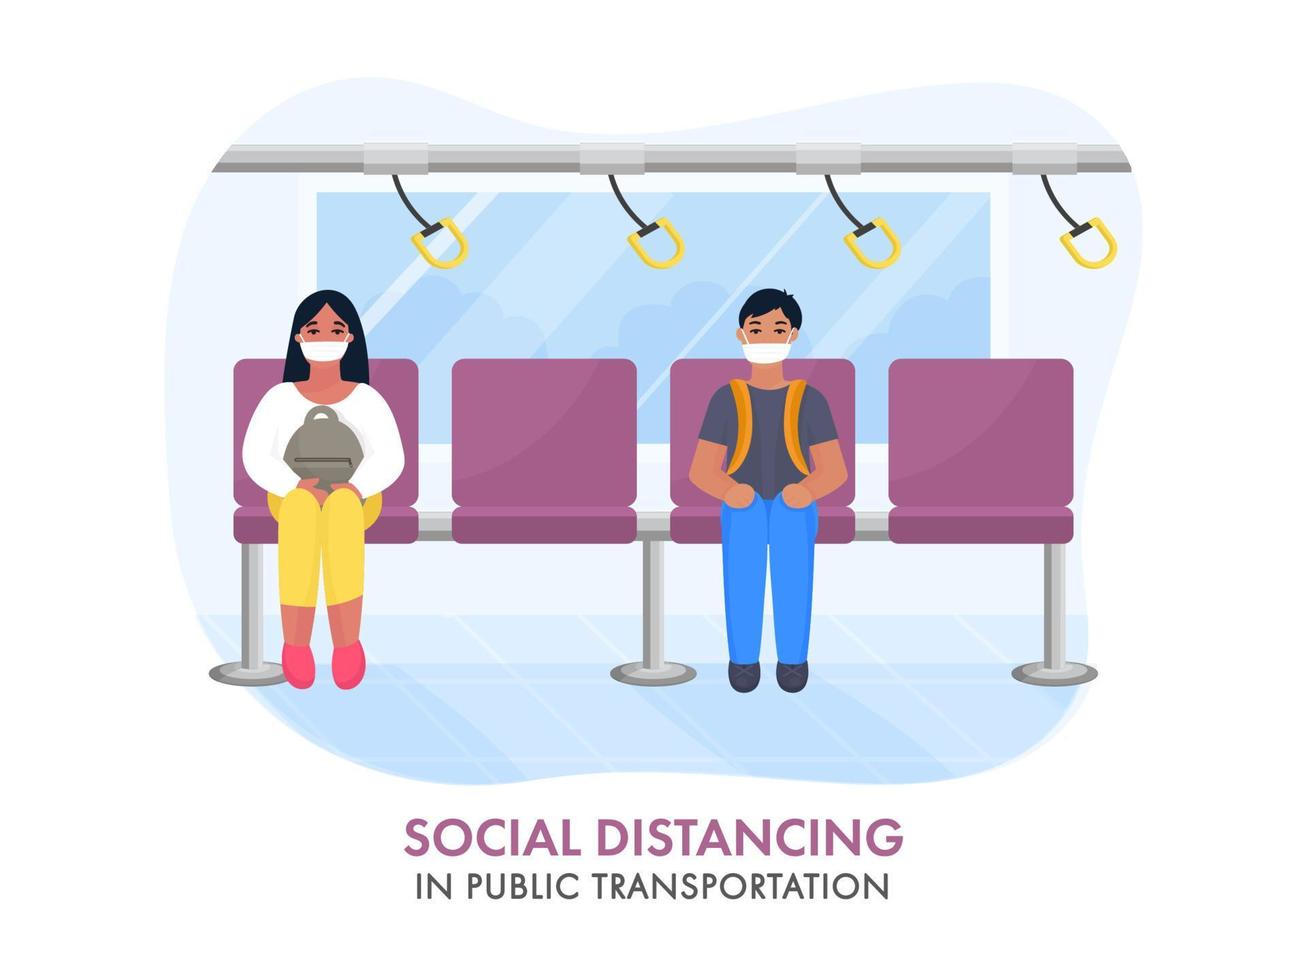 Social Distance in Public Transportation Concept Based Design with illustration of People wearing medical masks at train during Covid-19. vector